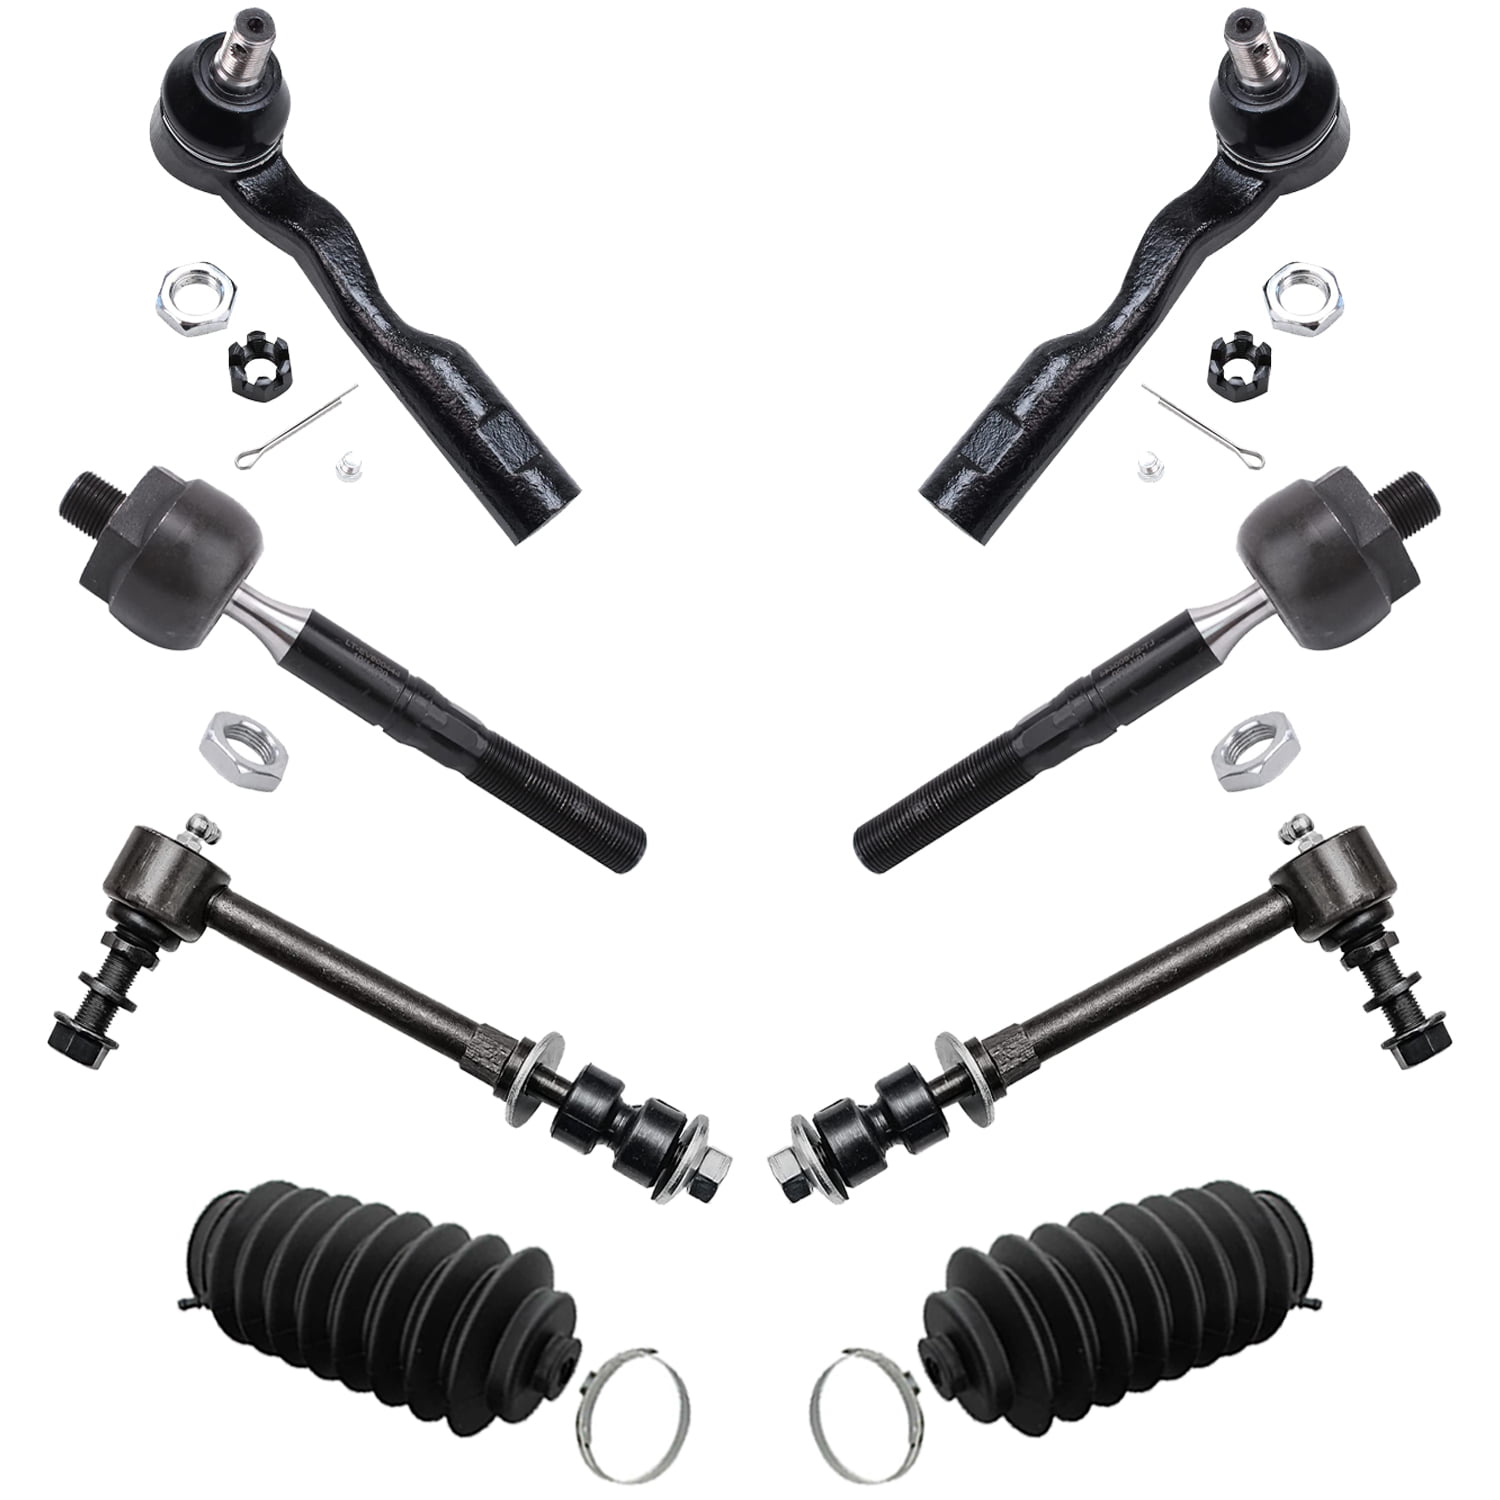 PartsW 6 Pc Front Suspension Kit for Infiniti I30 Nissan Maxima/Tie Rod Linkages Rack & Pinion Bellow Boot 